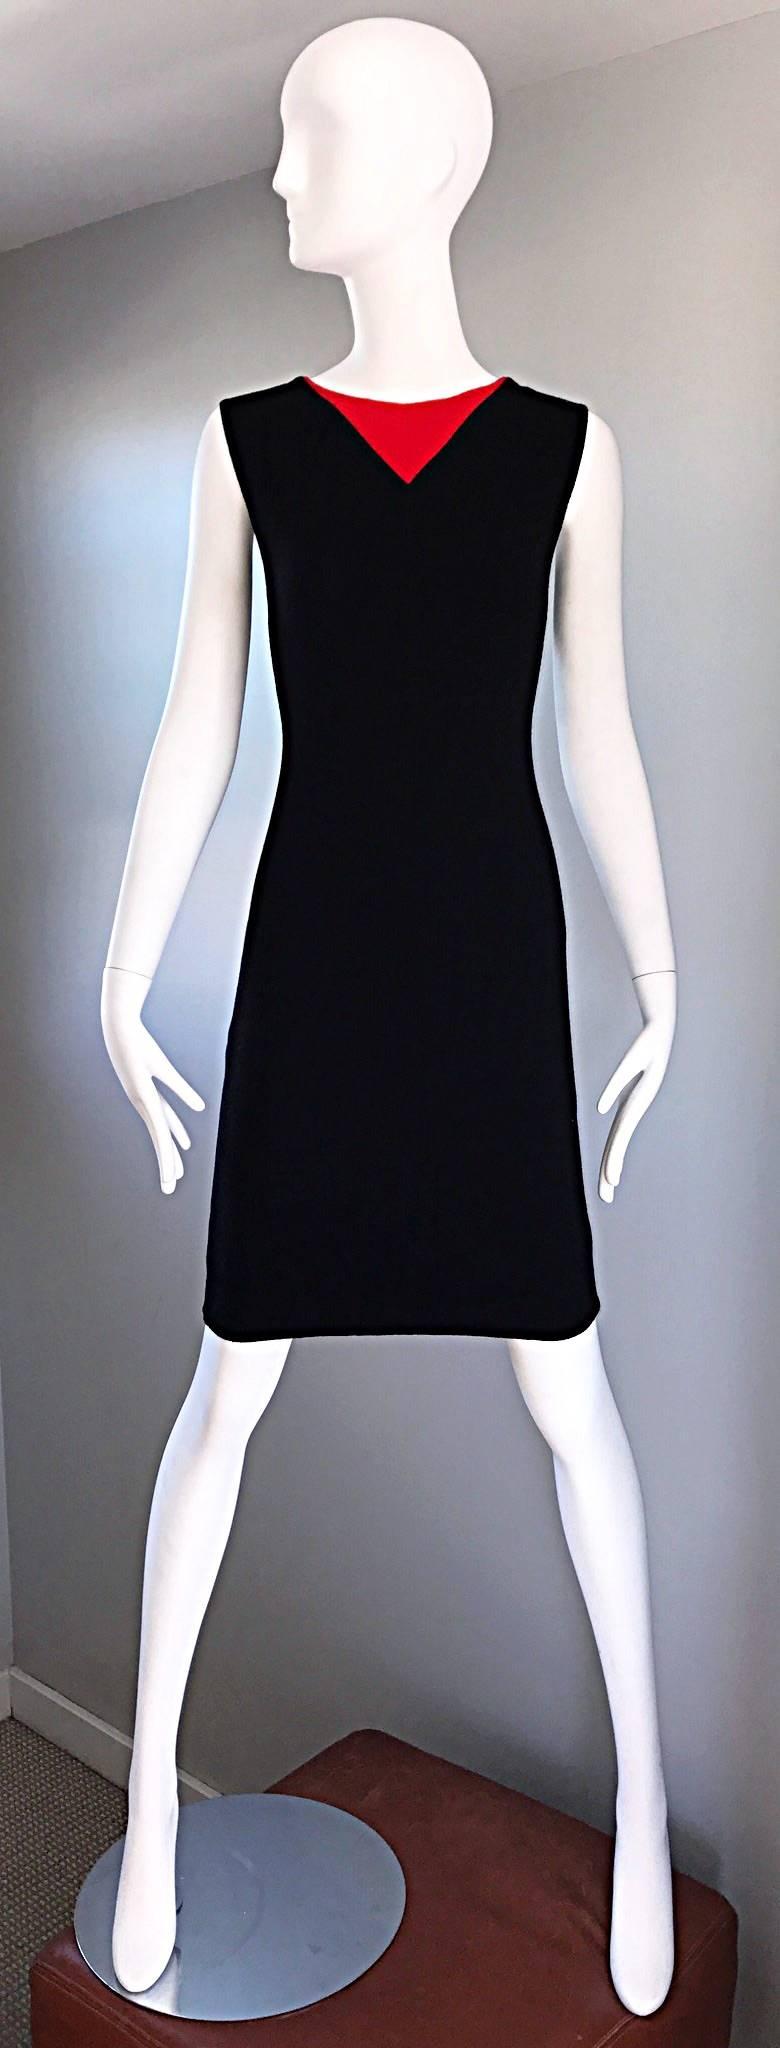 Chic vintage 1960s BILL BLASS wool shift dress! Jet black soft virgin wool, with a bright lipstick red triangle detail at the neckline. Classic flattering shape. Full metal zipper up the back with hook-and-eye closure. Fully lined. A different, but